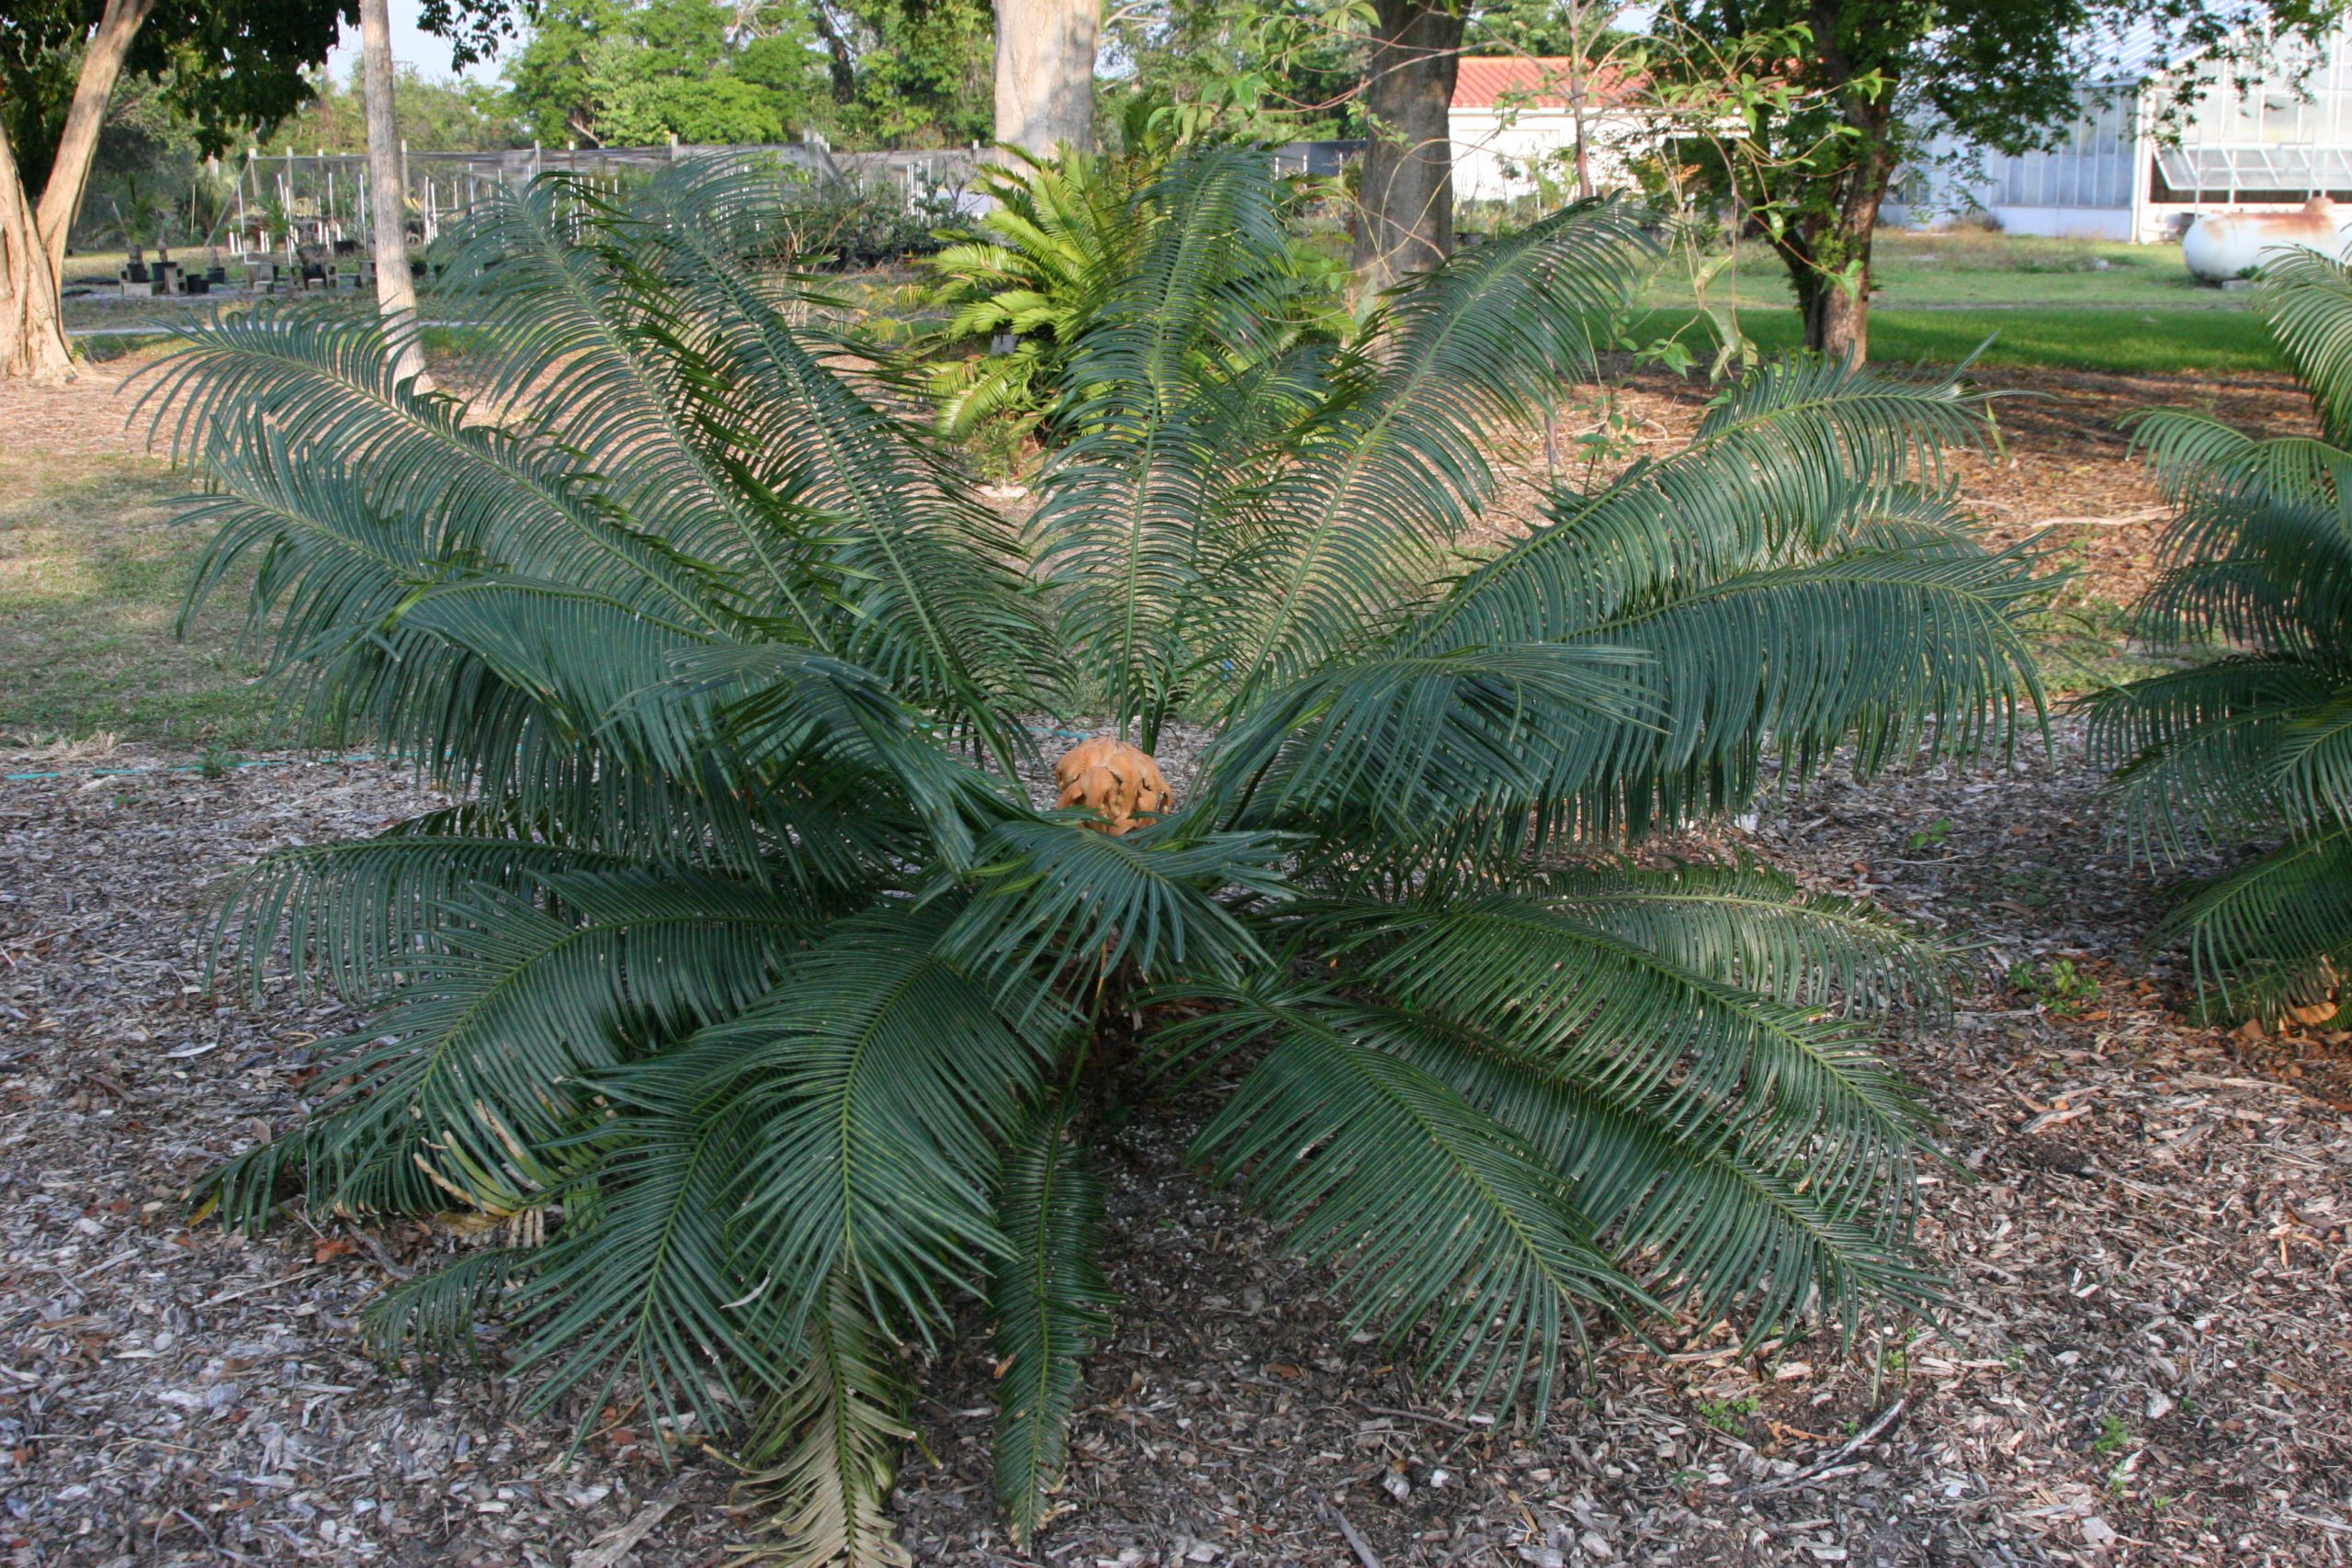 The Micronesian cycads growing at MBC have yet to reach their impressive heights, but are thriving.